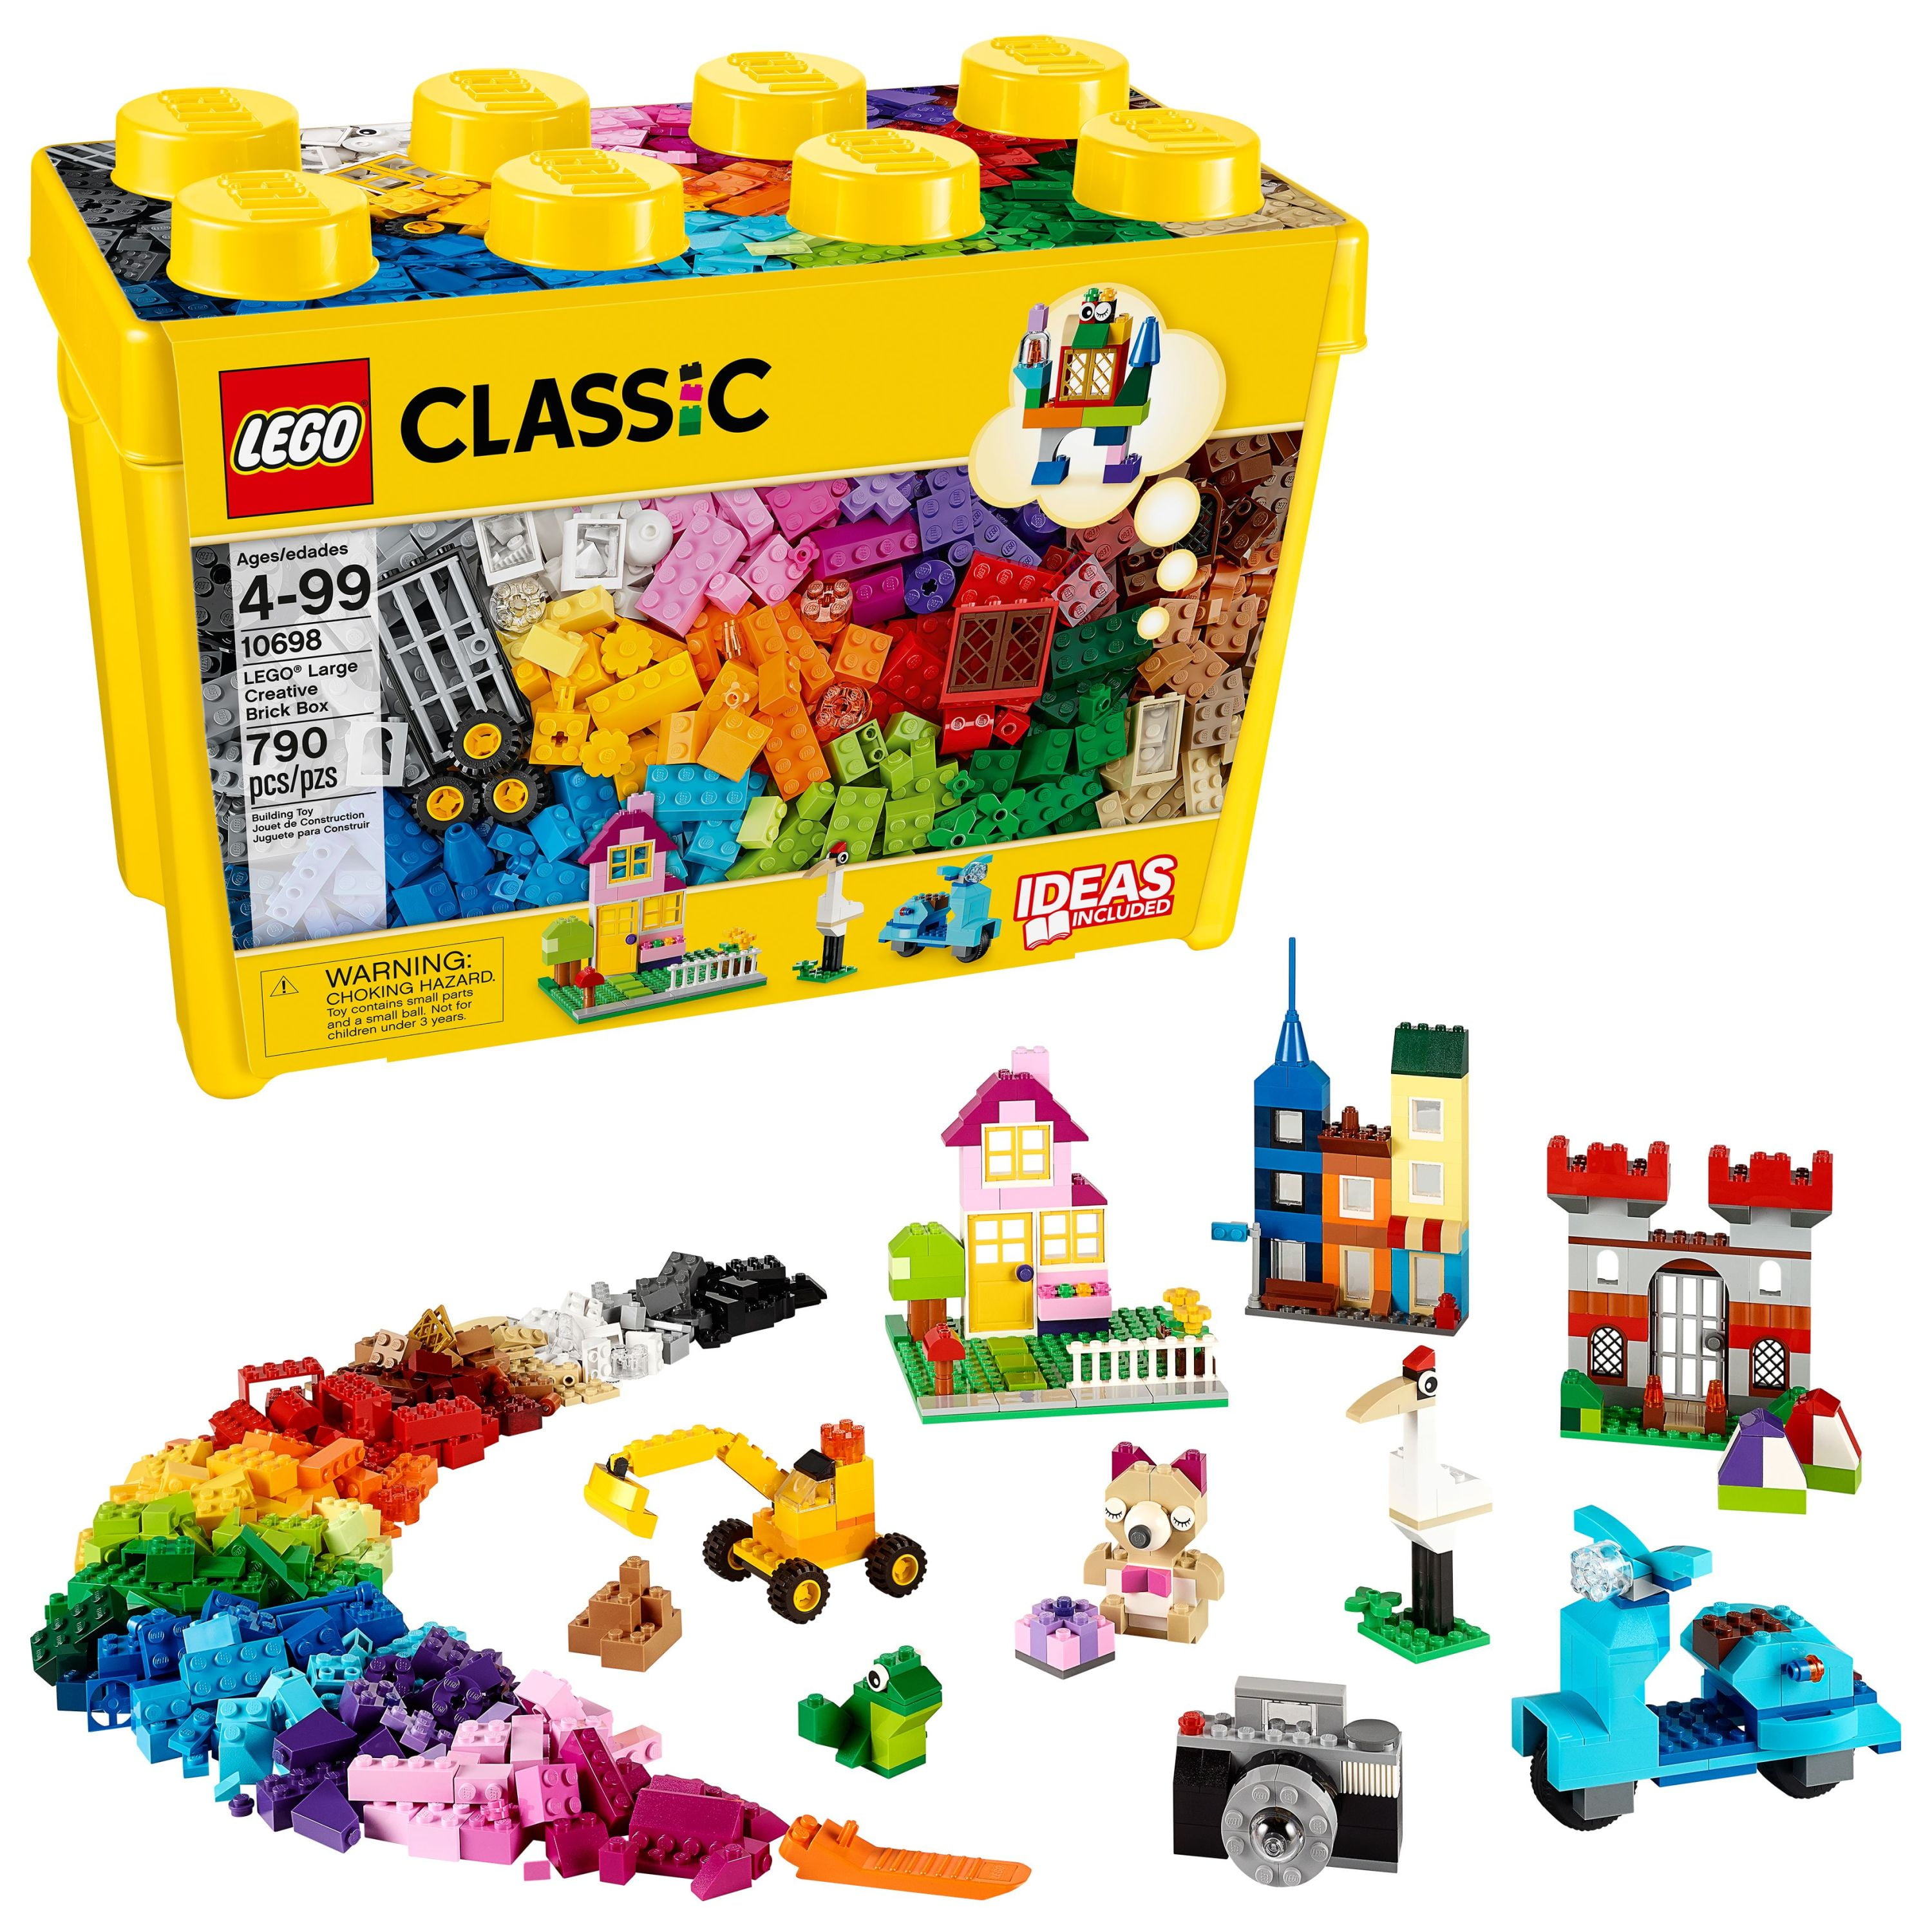 LEGO Classic Large Brick Box 10698 Building Toy Set for Back to School, Toy Storage Solution Classrooms, Interactive Building Toy for Kids, Boys, and - Walmart.com